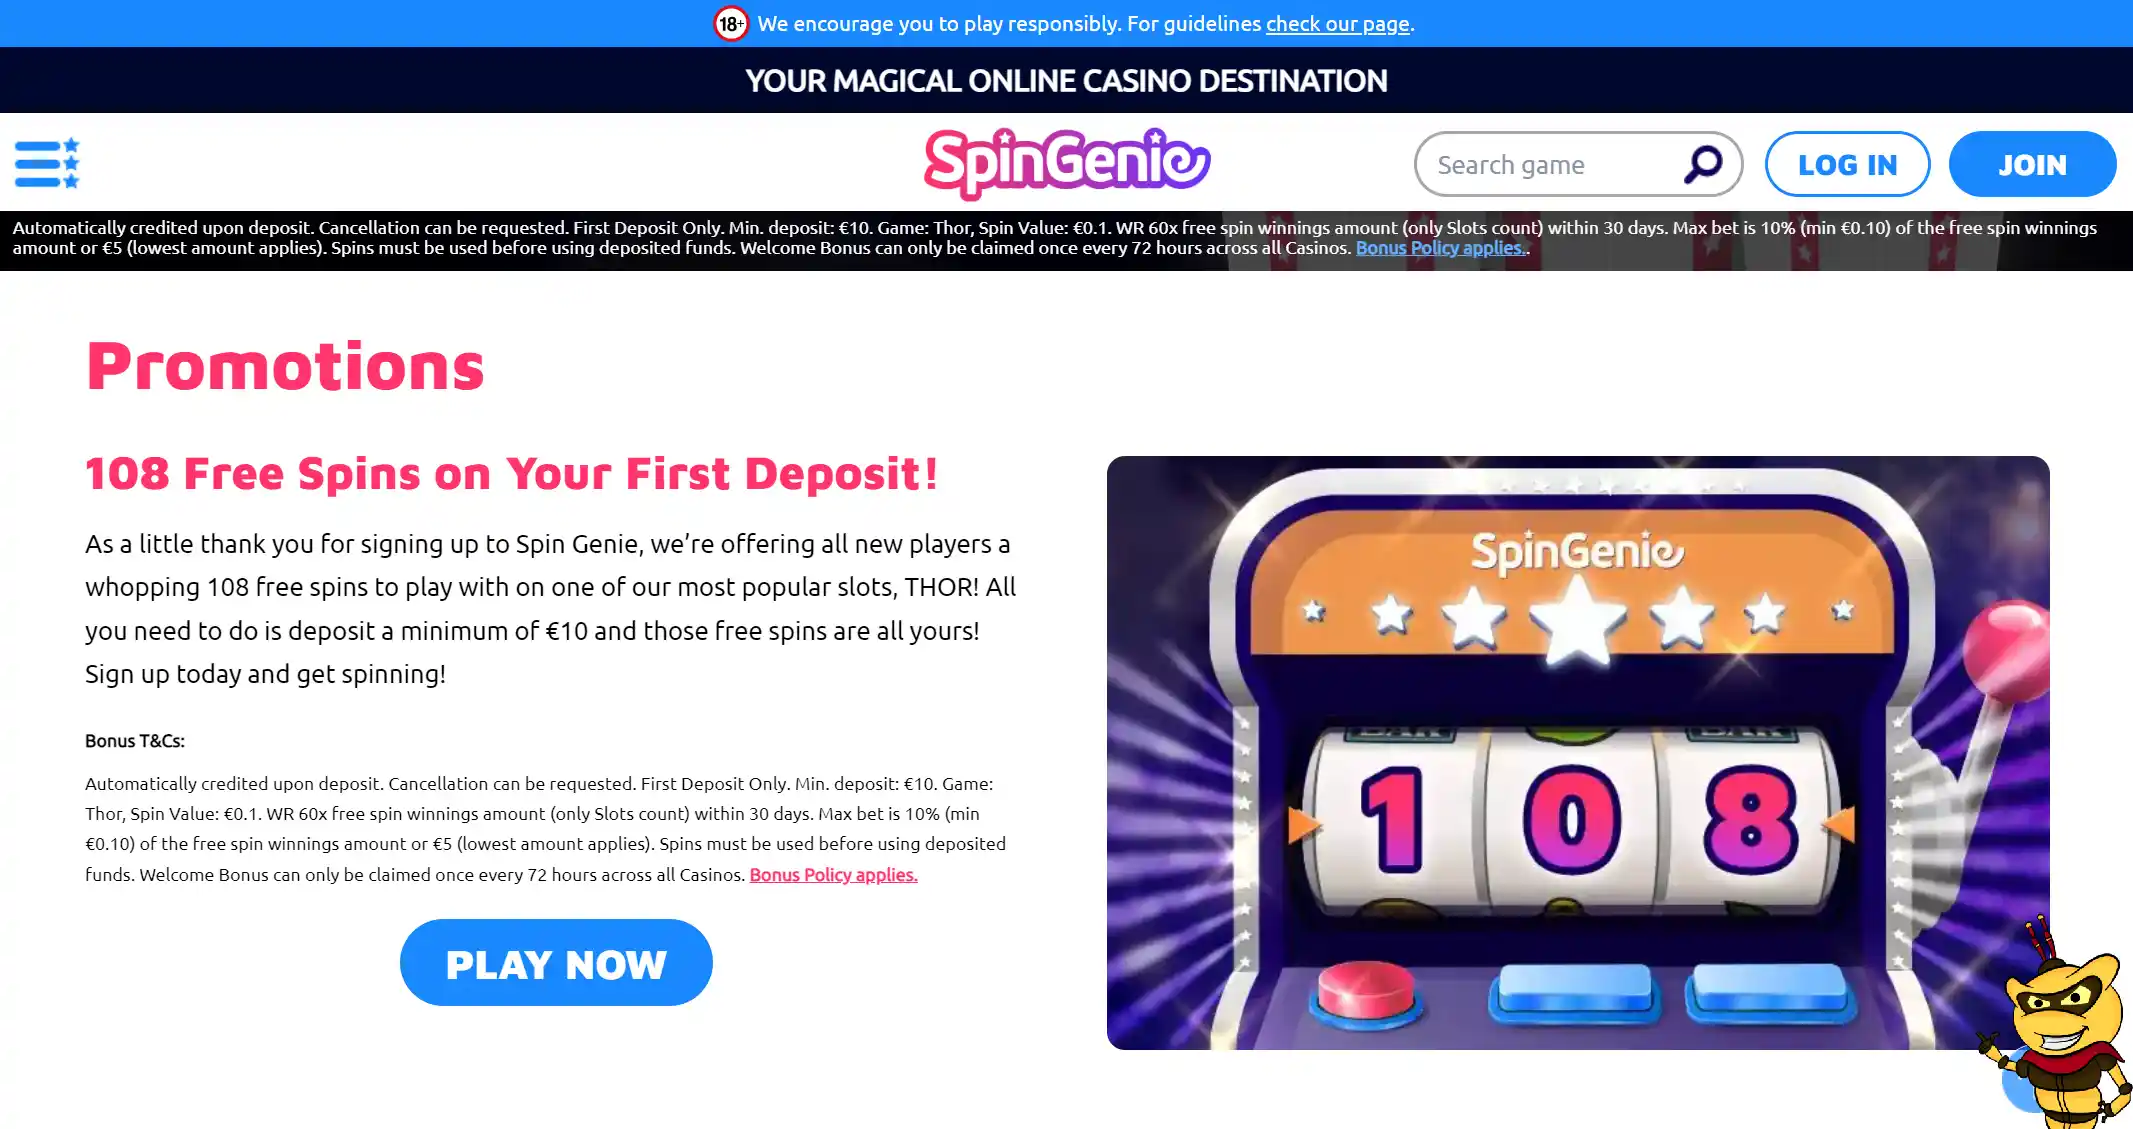 promotional Offers At SpinGenie Casino 